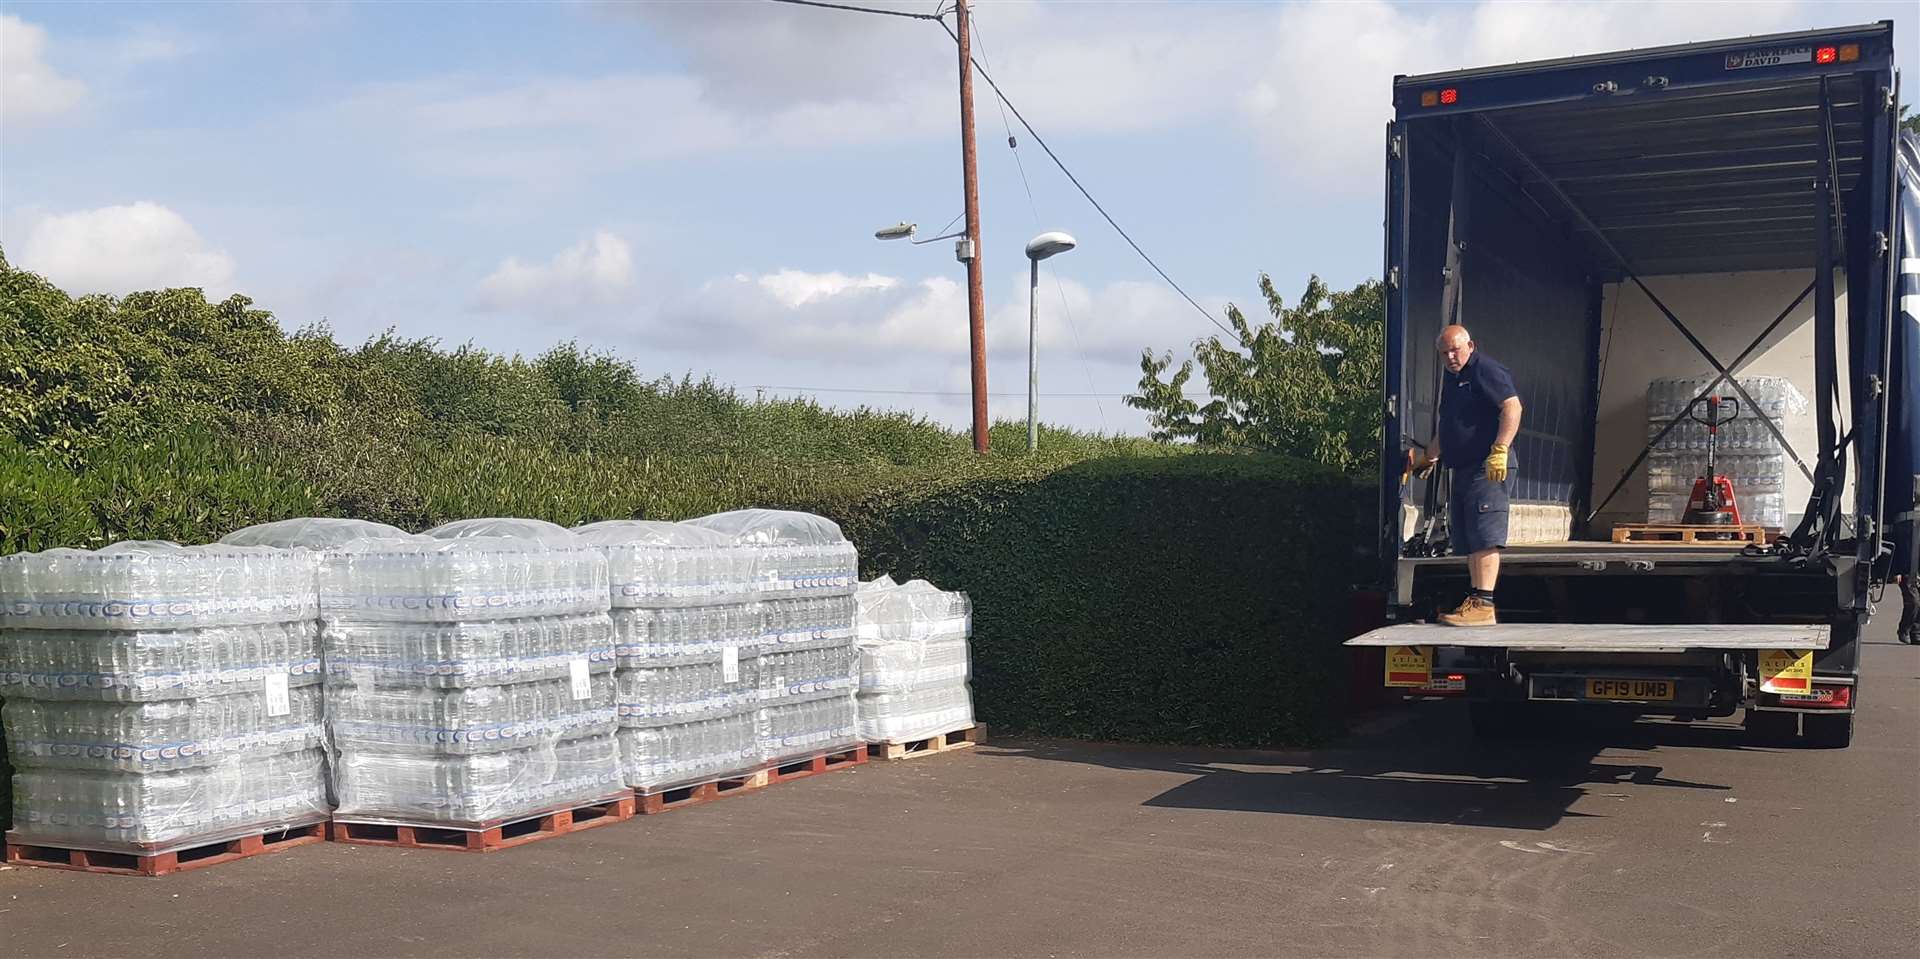 Pallets of water were delivered to East Peckham following a shortage